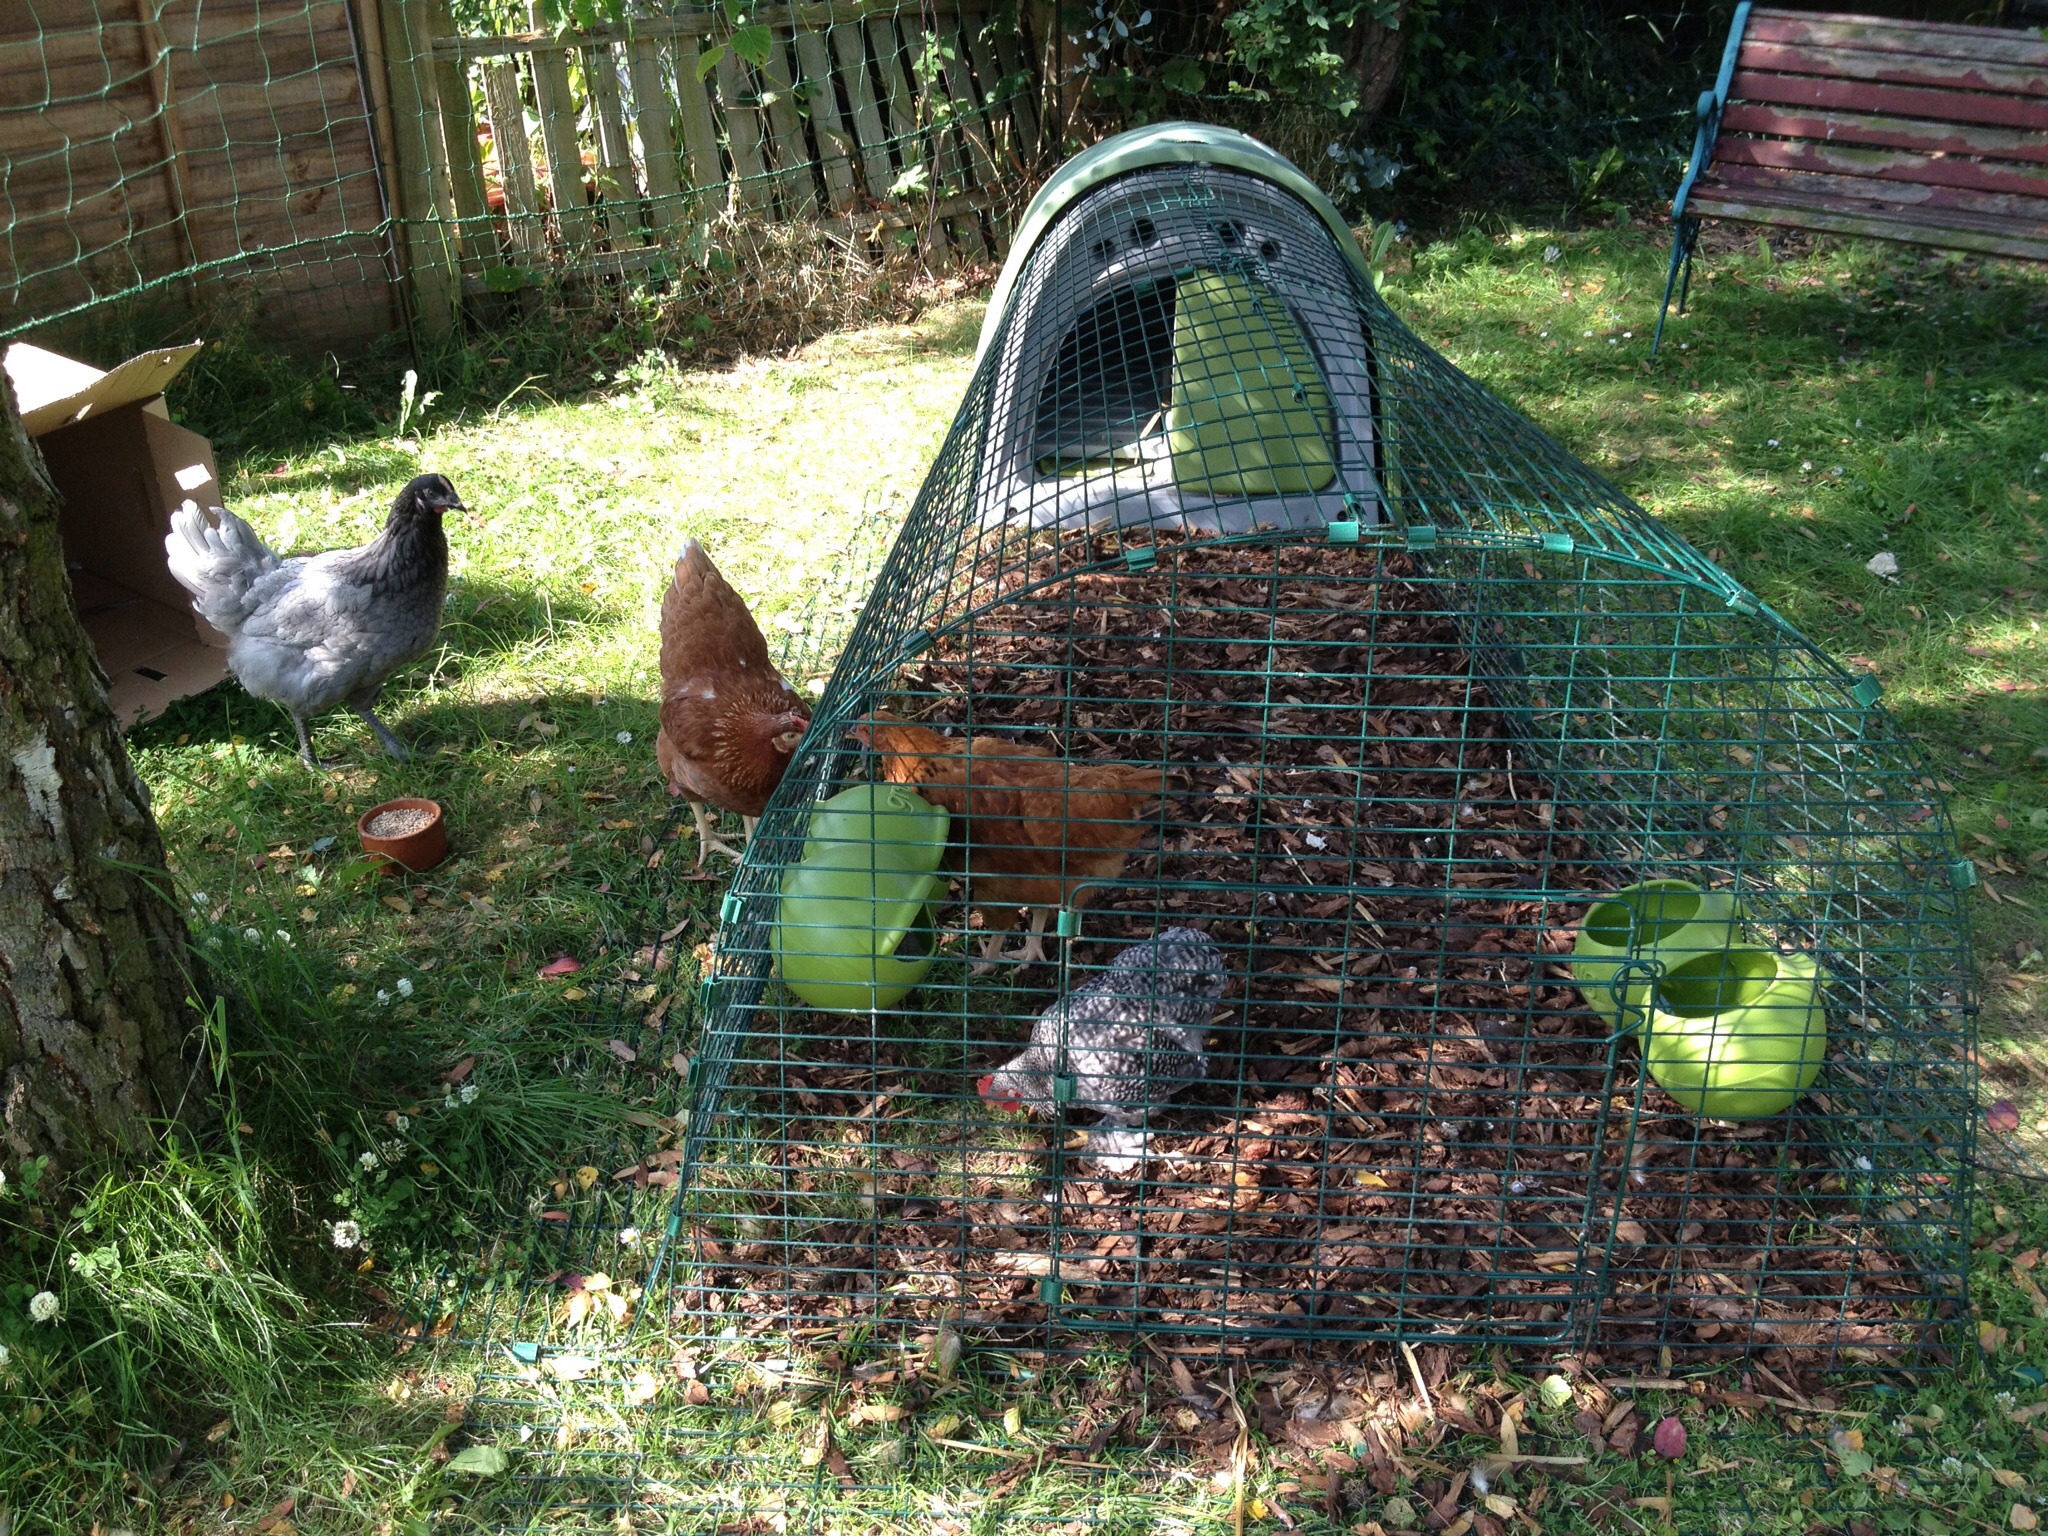 Emilia Taylor's hens love searching for worms inside their Eglu Run